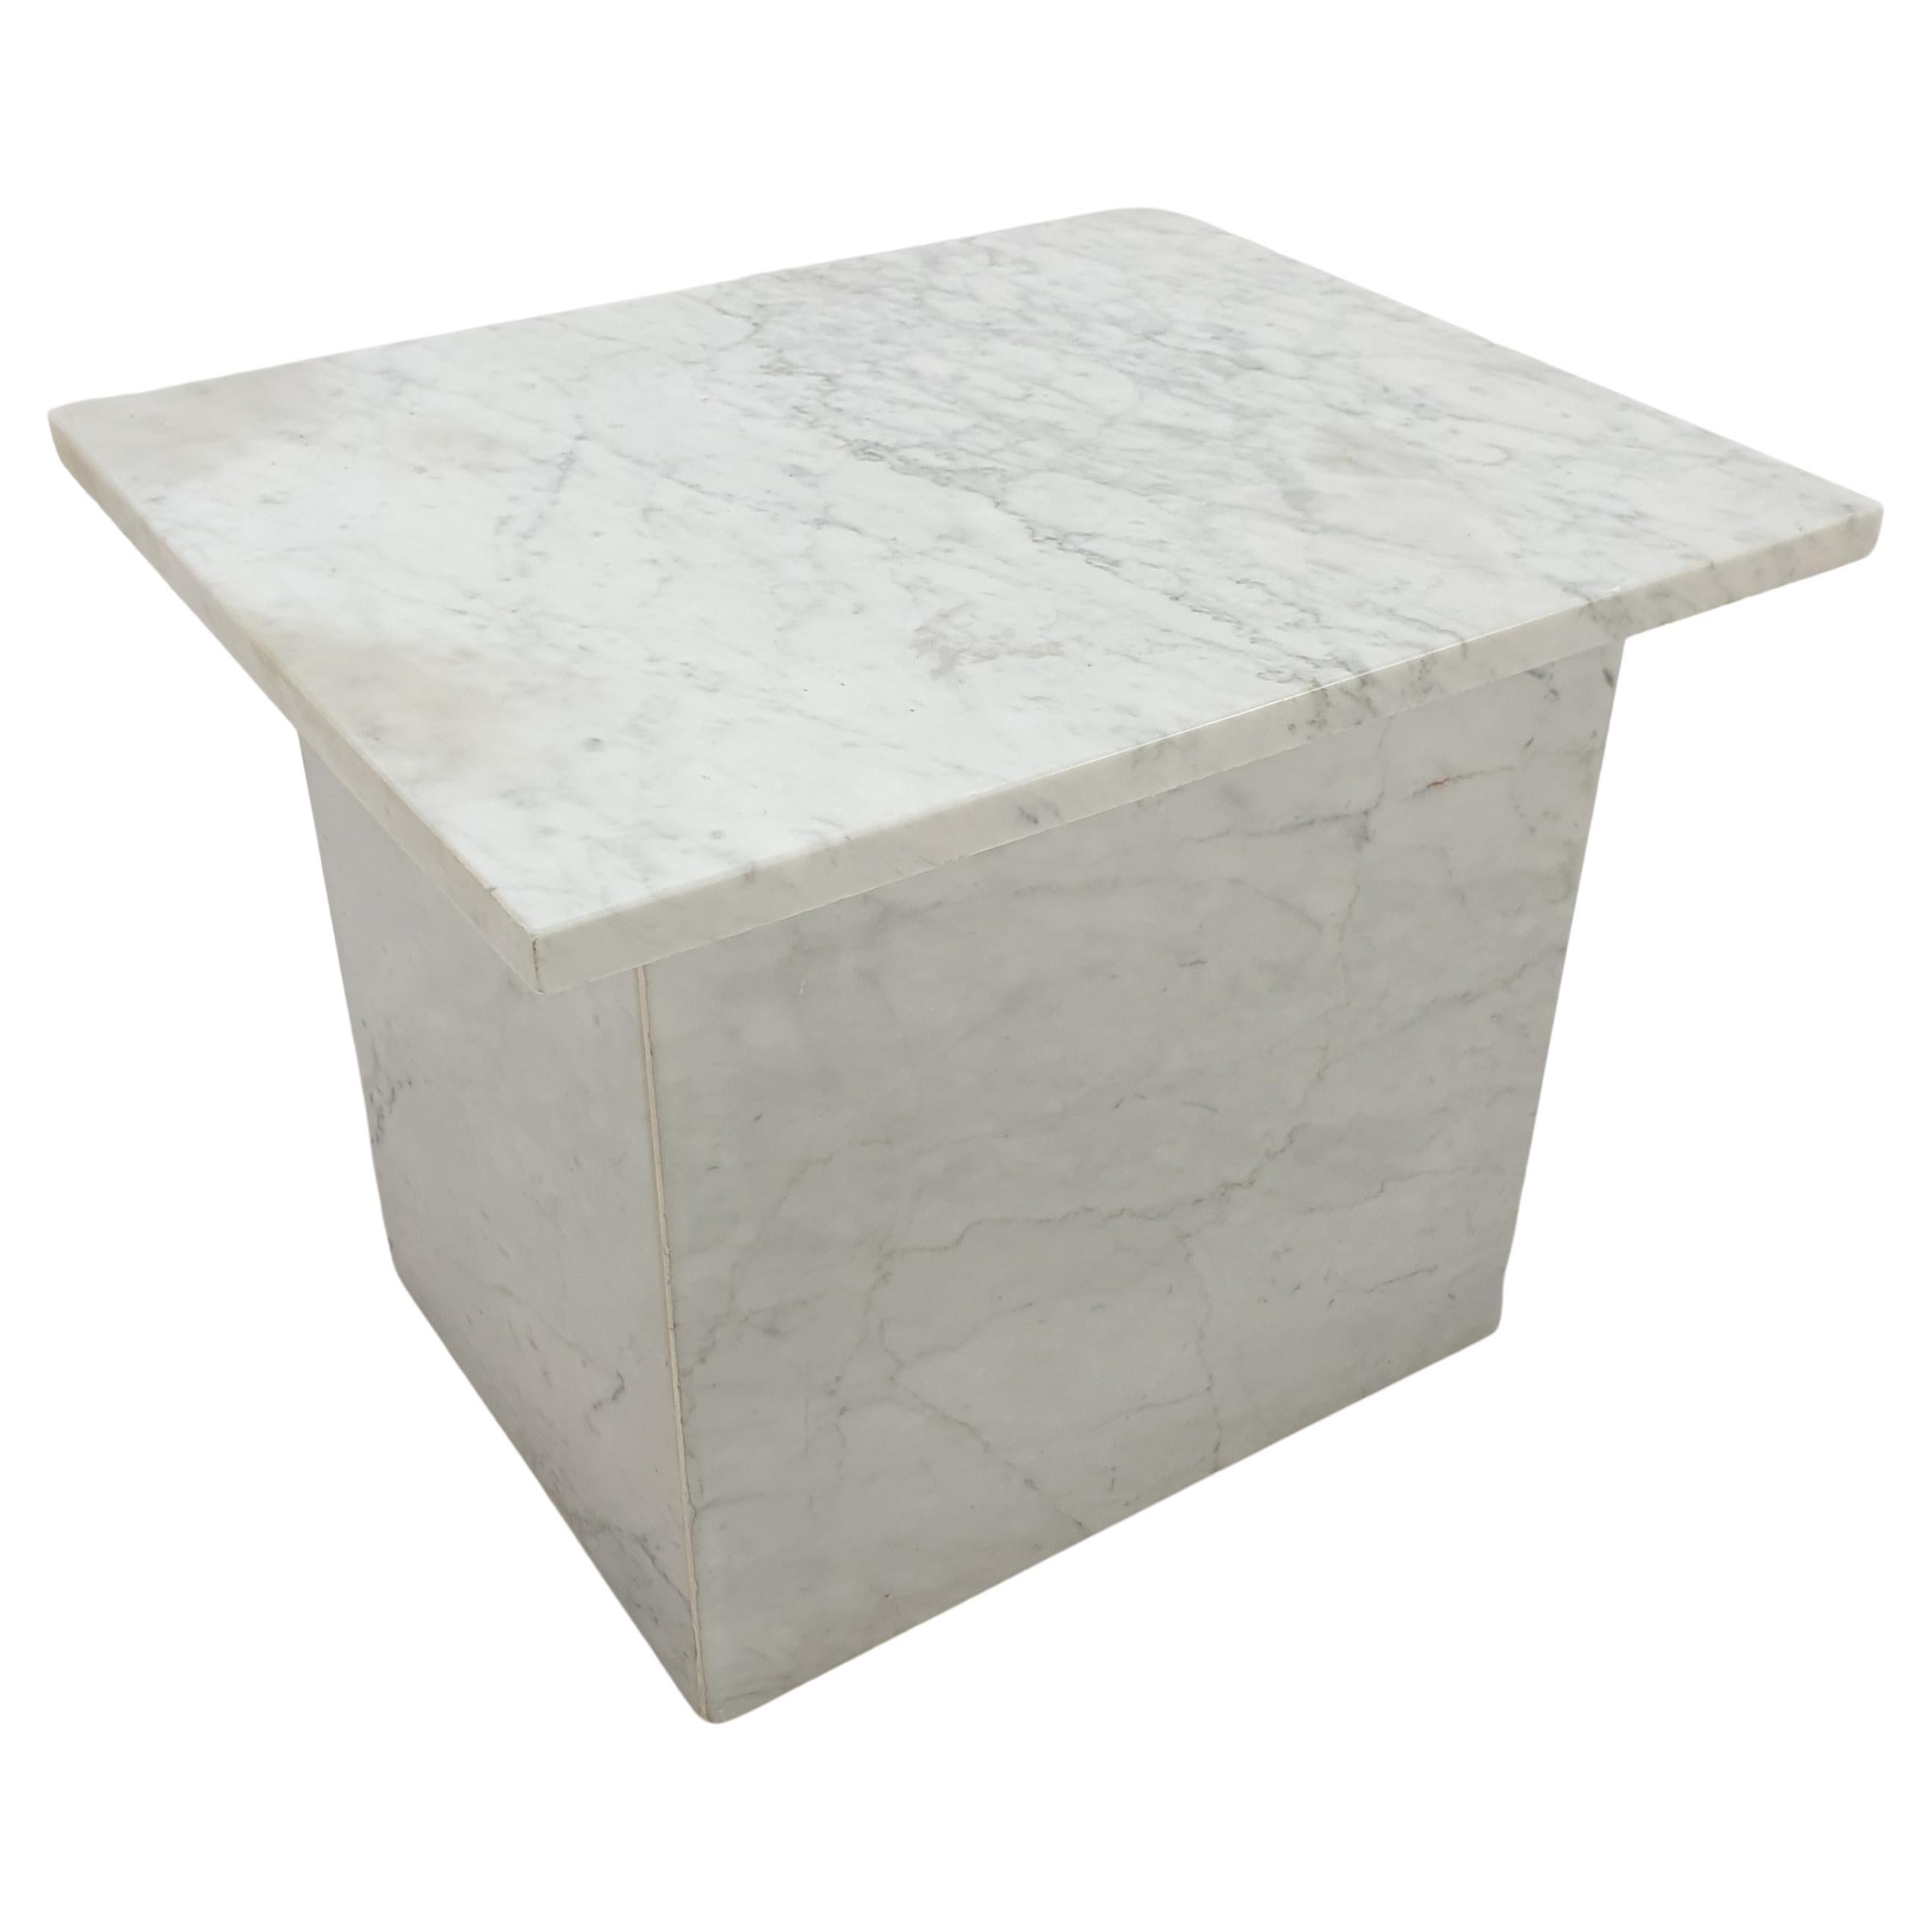 Italian Marble Coffee or Side Table, 1980s